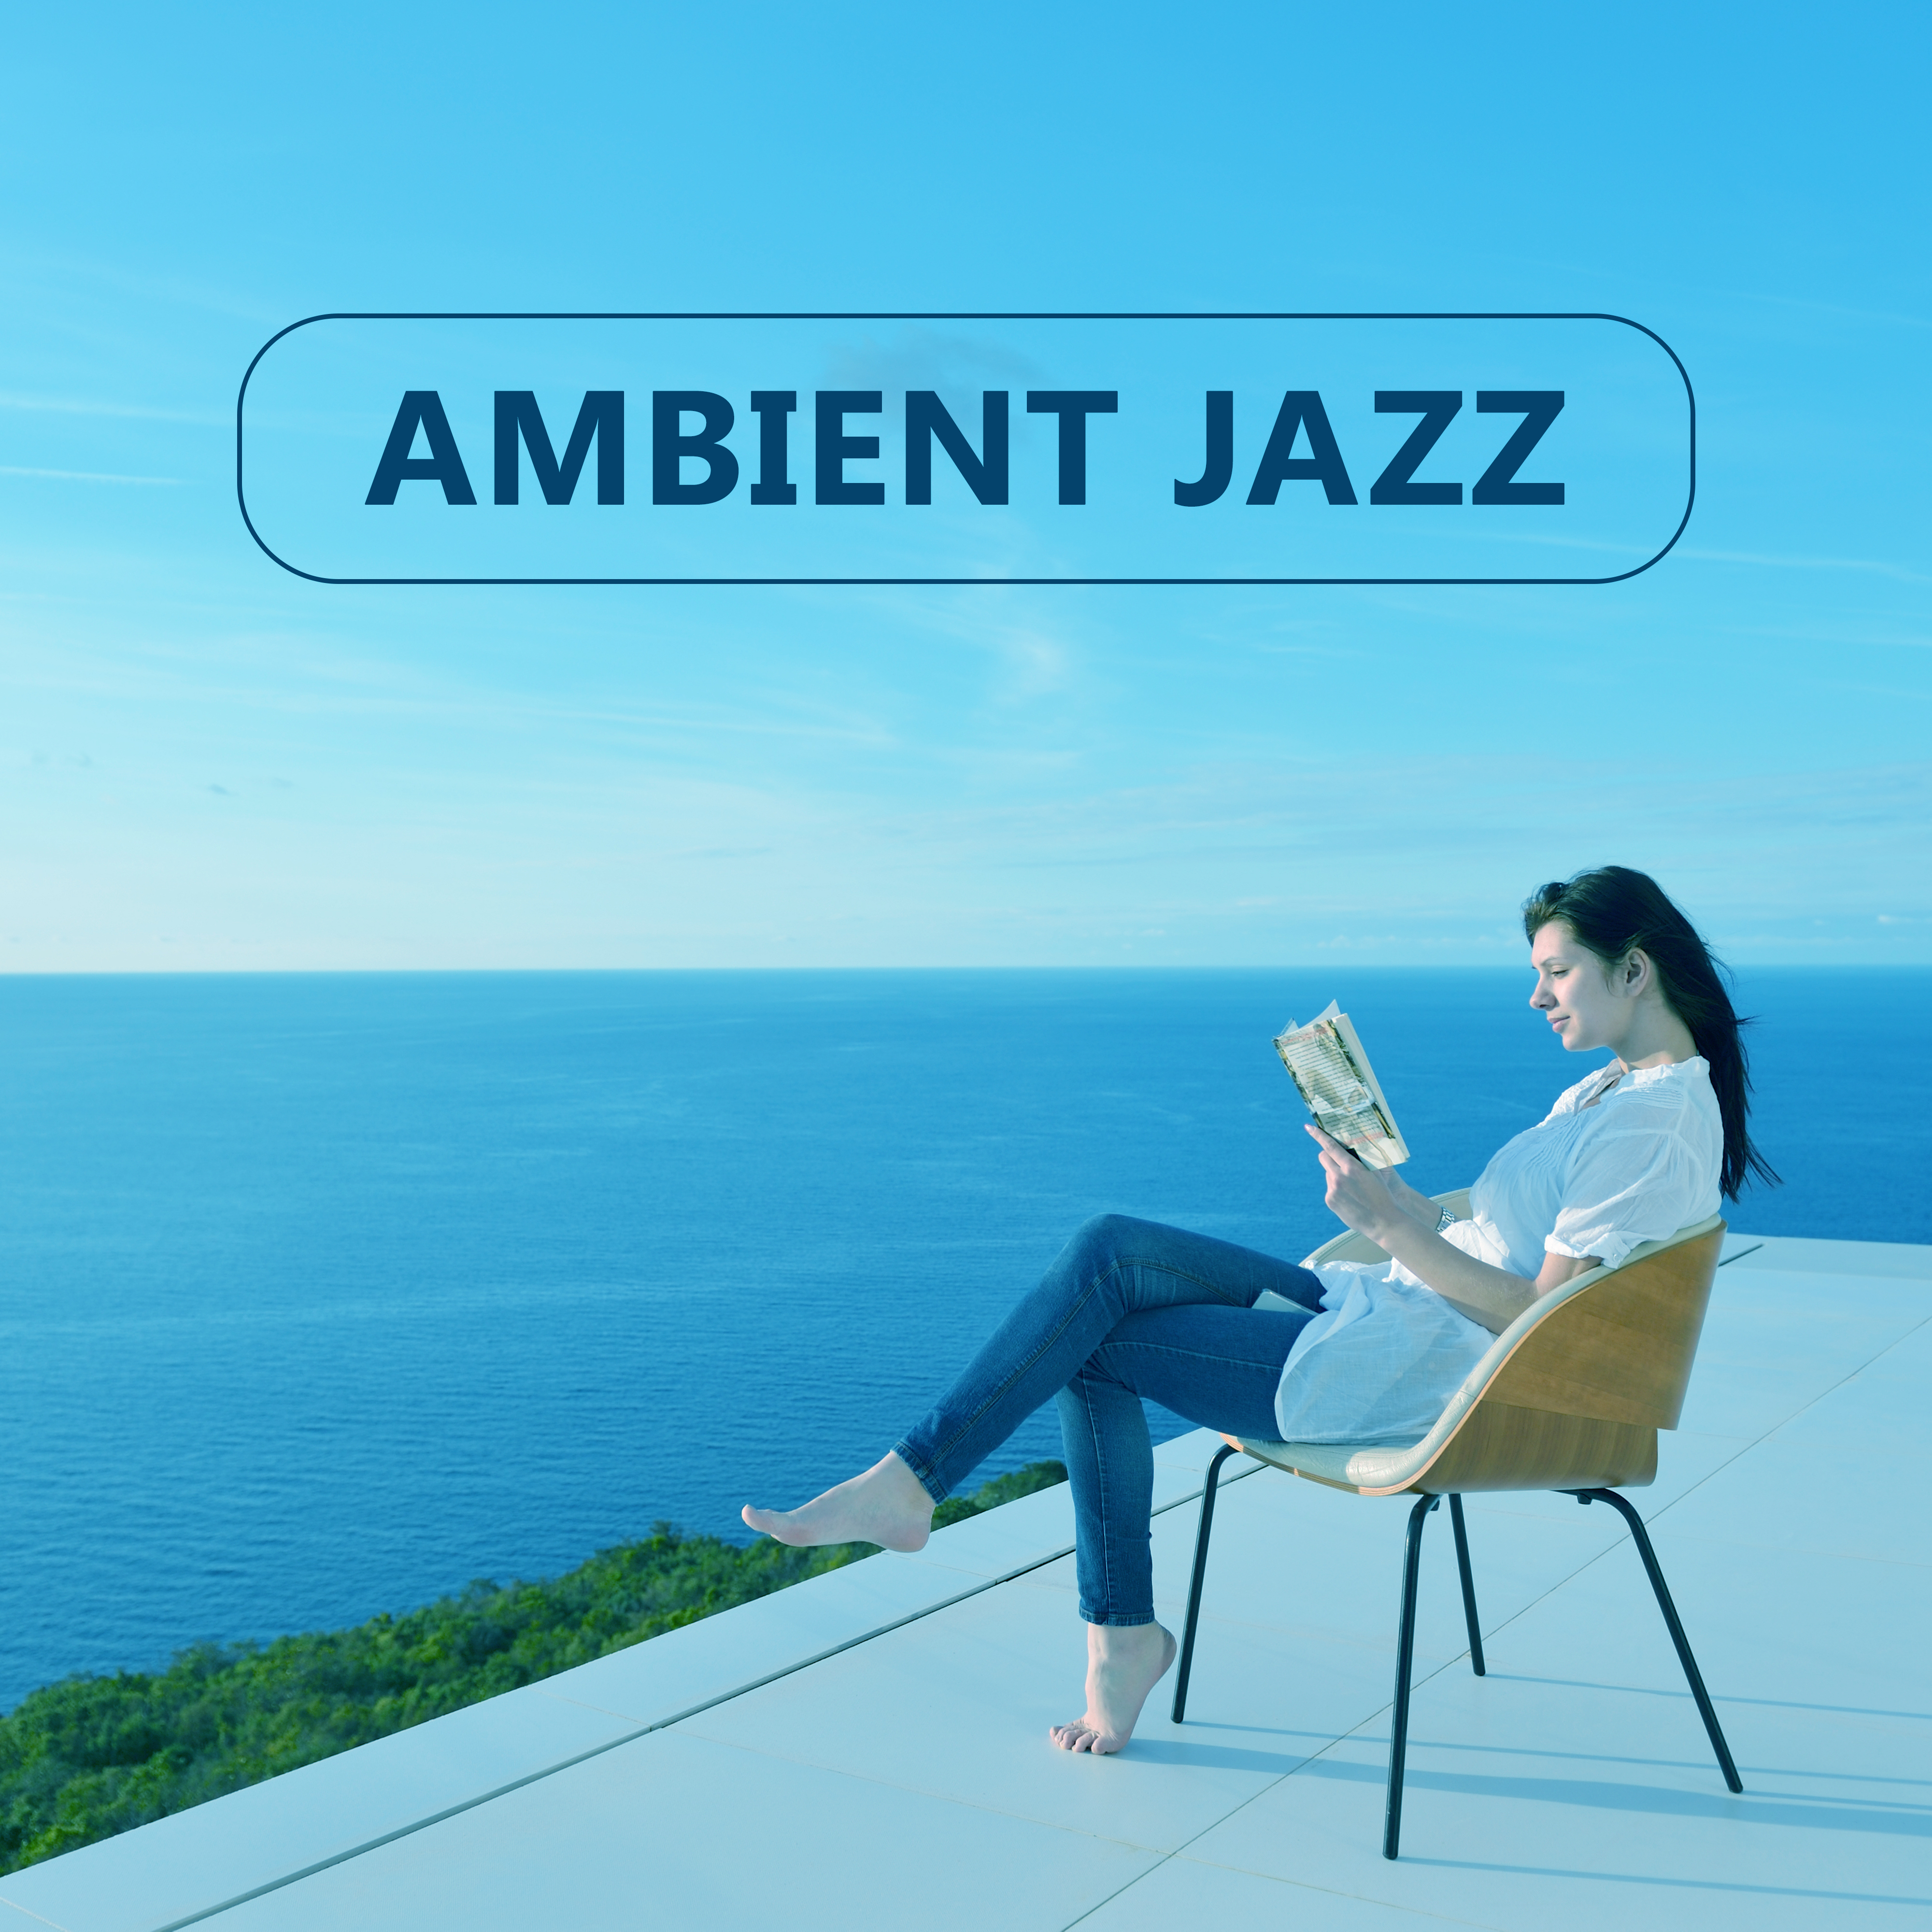 Ambient Jazz – Instrumental Music, Ambient, Smooth Jazz, Piano, Bar, Lounge 2017